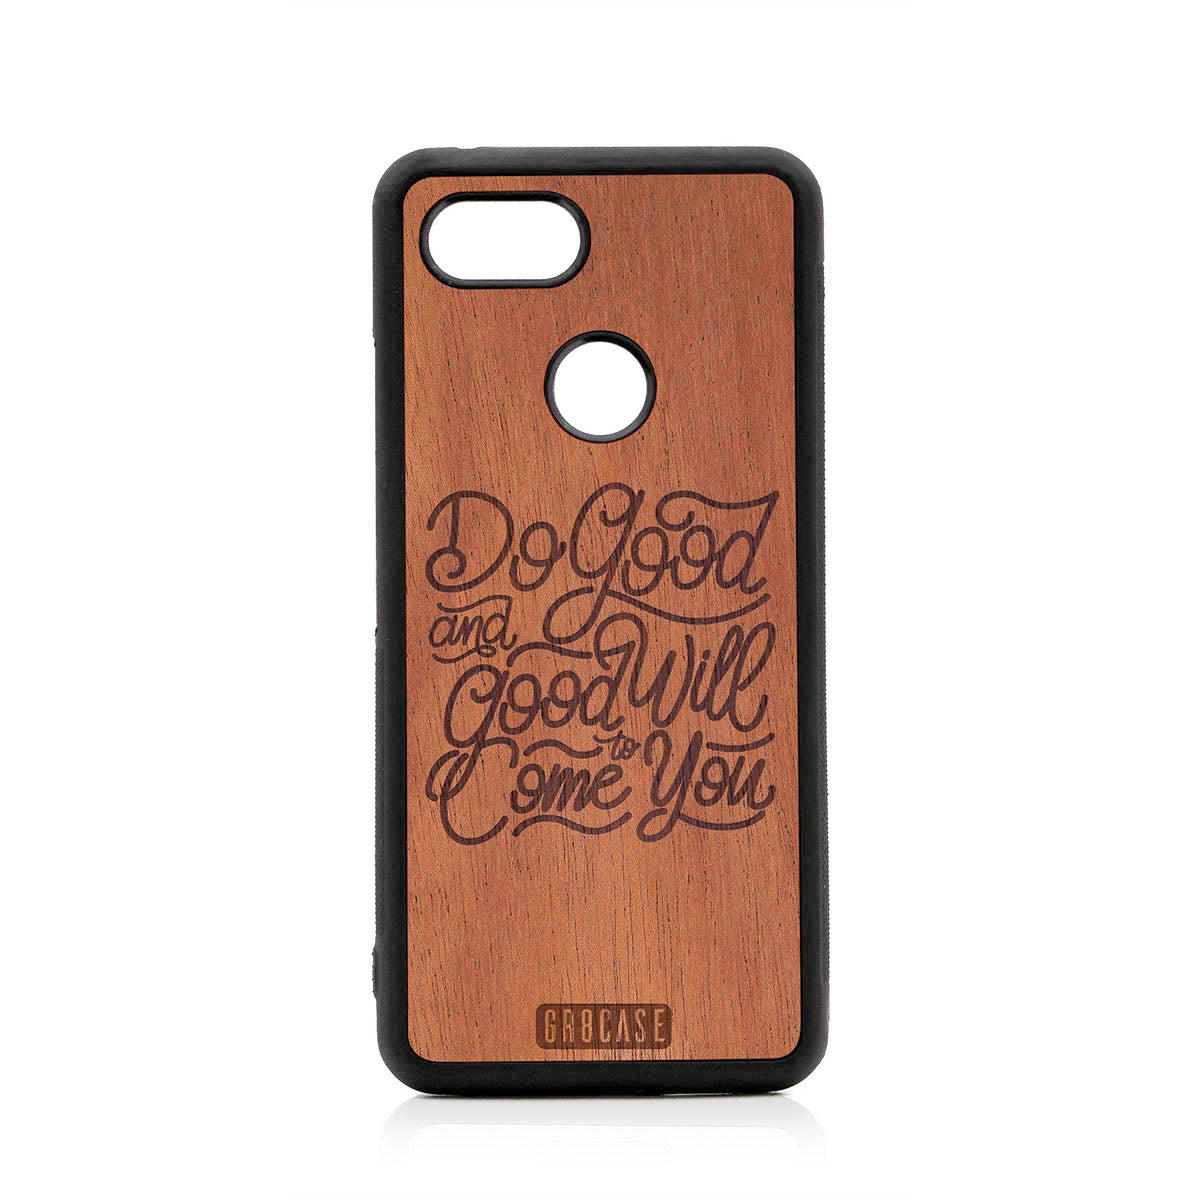 Do Good And Good Will Come To You Design Wood Case For Google Pixel 3 by GR8CASE